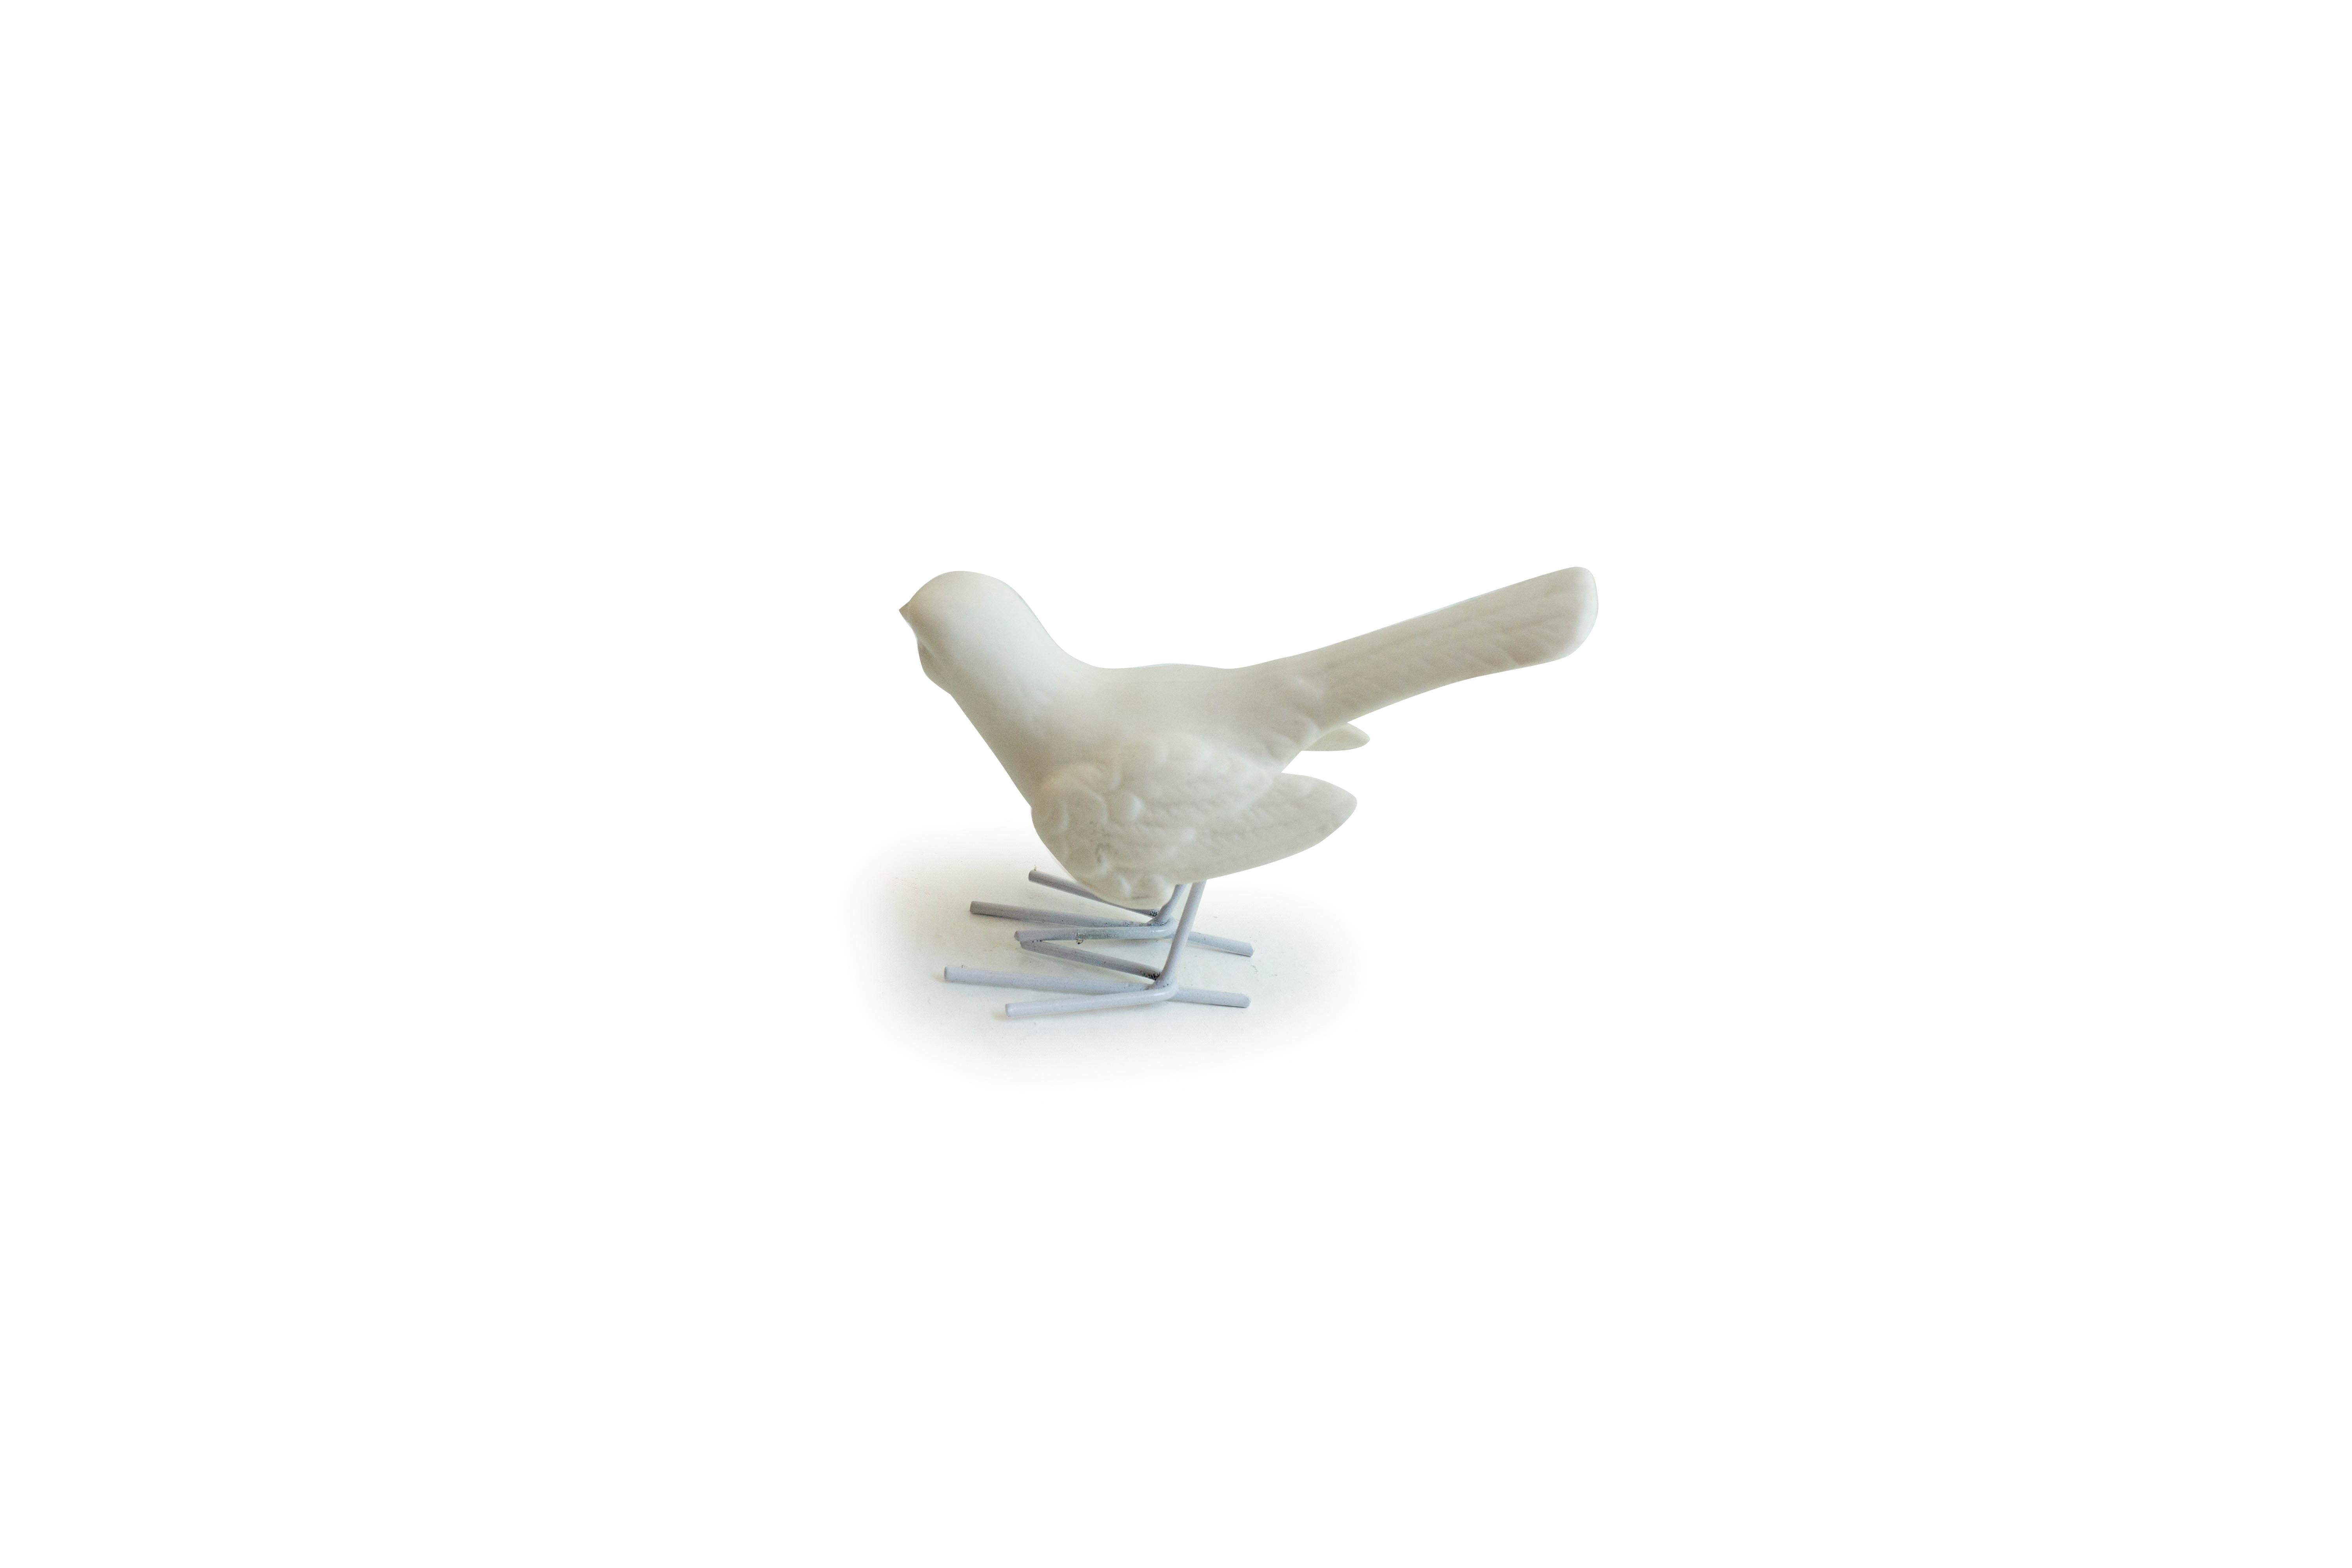 Set of 4 Unglazed White Porcelain Birds, Starlings supported by White Iron Legs  In Excellent Condition For Sale In Greenwich, CT